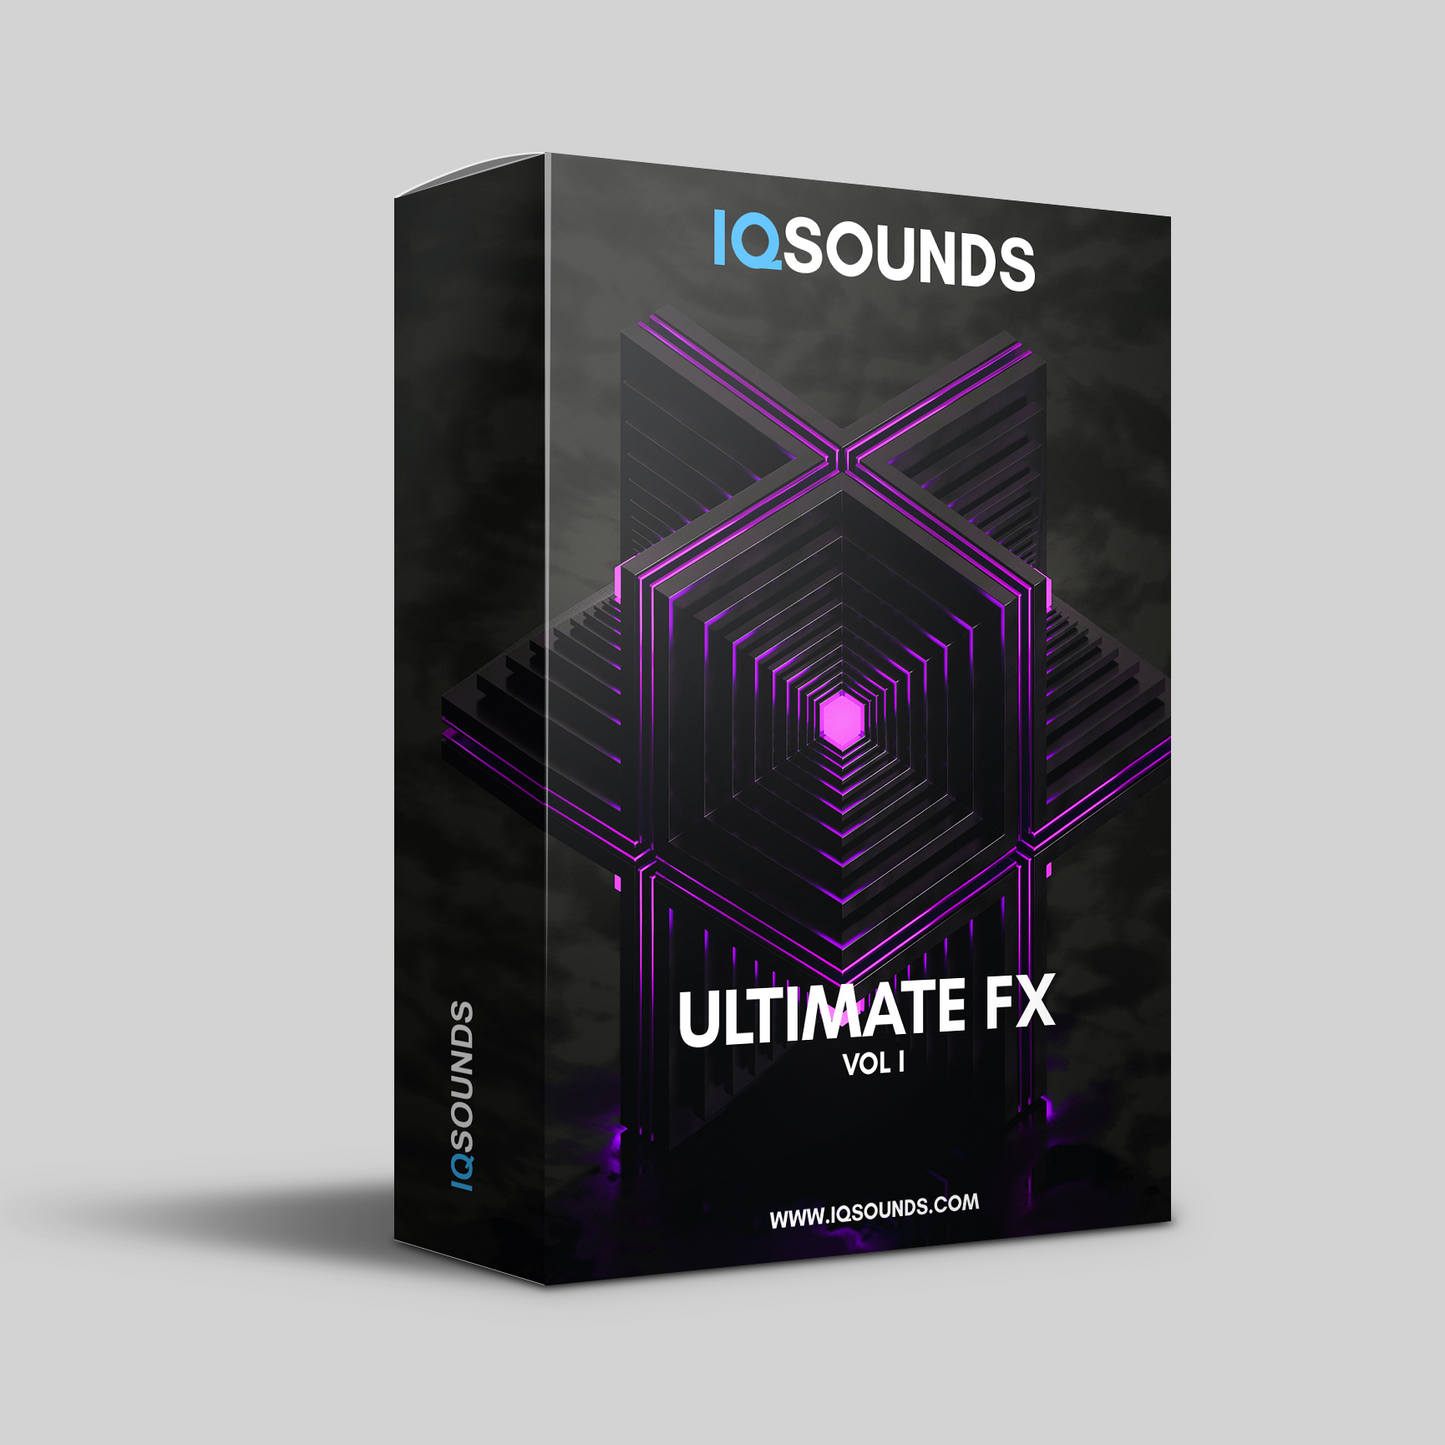 ultimate fx, fx samples, effects samples, effects sample pack, fx sample pack, tech house fx, house fx, build up fx, how to make sound fx, how to use sound fx, earcandy, iqsounds, iqsounds samples, iq sounds samples